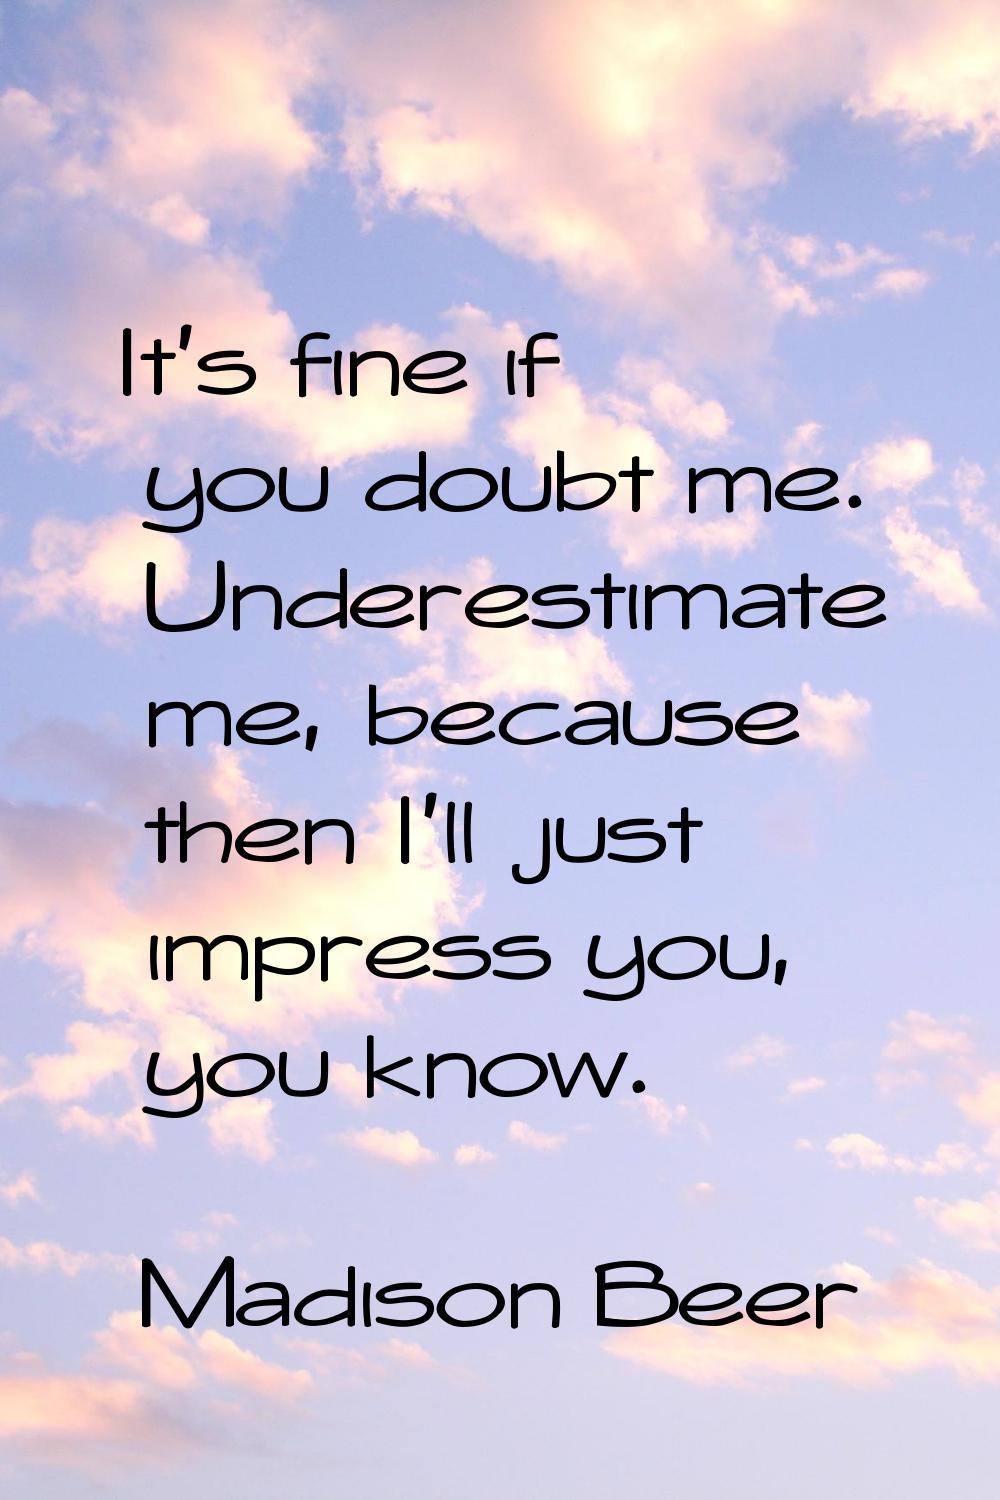 It's fine if you doubt me. Underestimate me, because then I'll just impress you, you know.